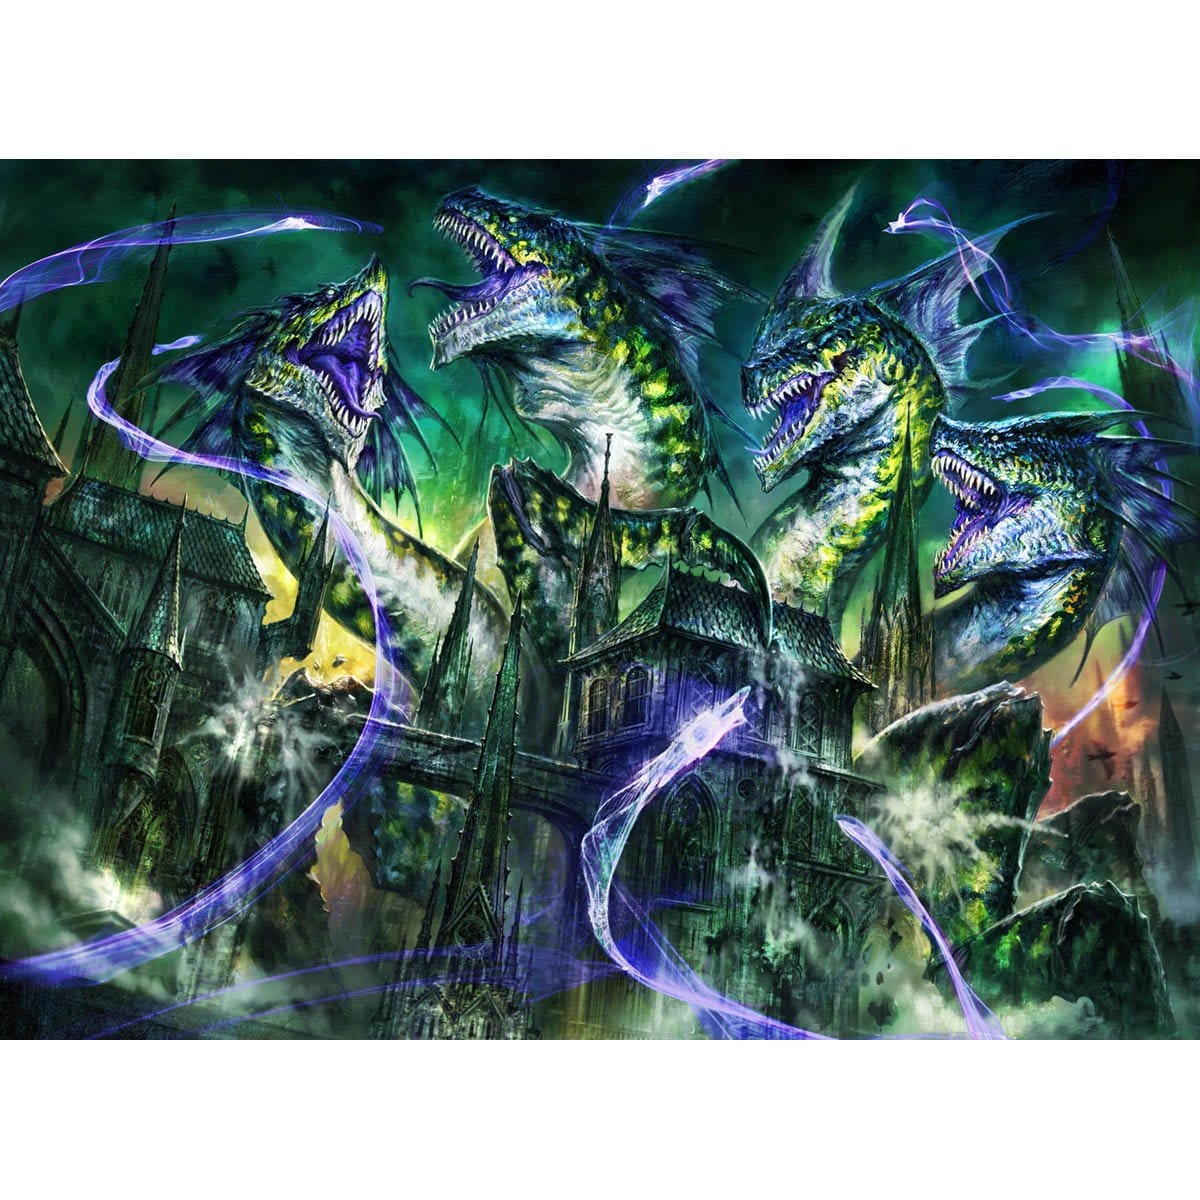 Bioessence Hydra Print - Print - Original Magic Art - Accessories for Magic the Gathering and other card games